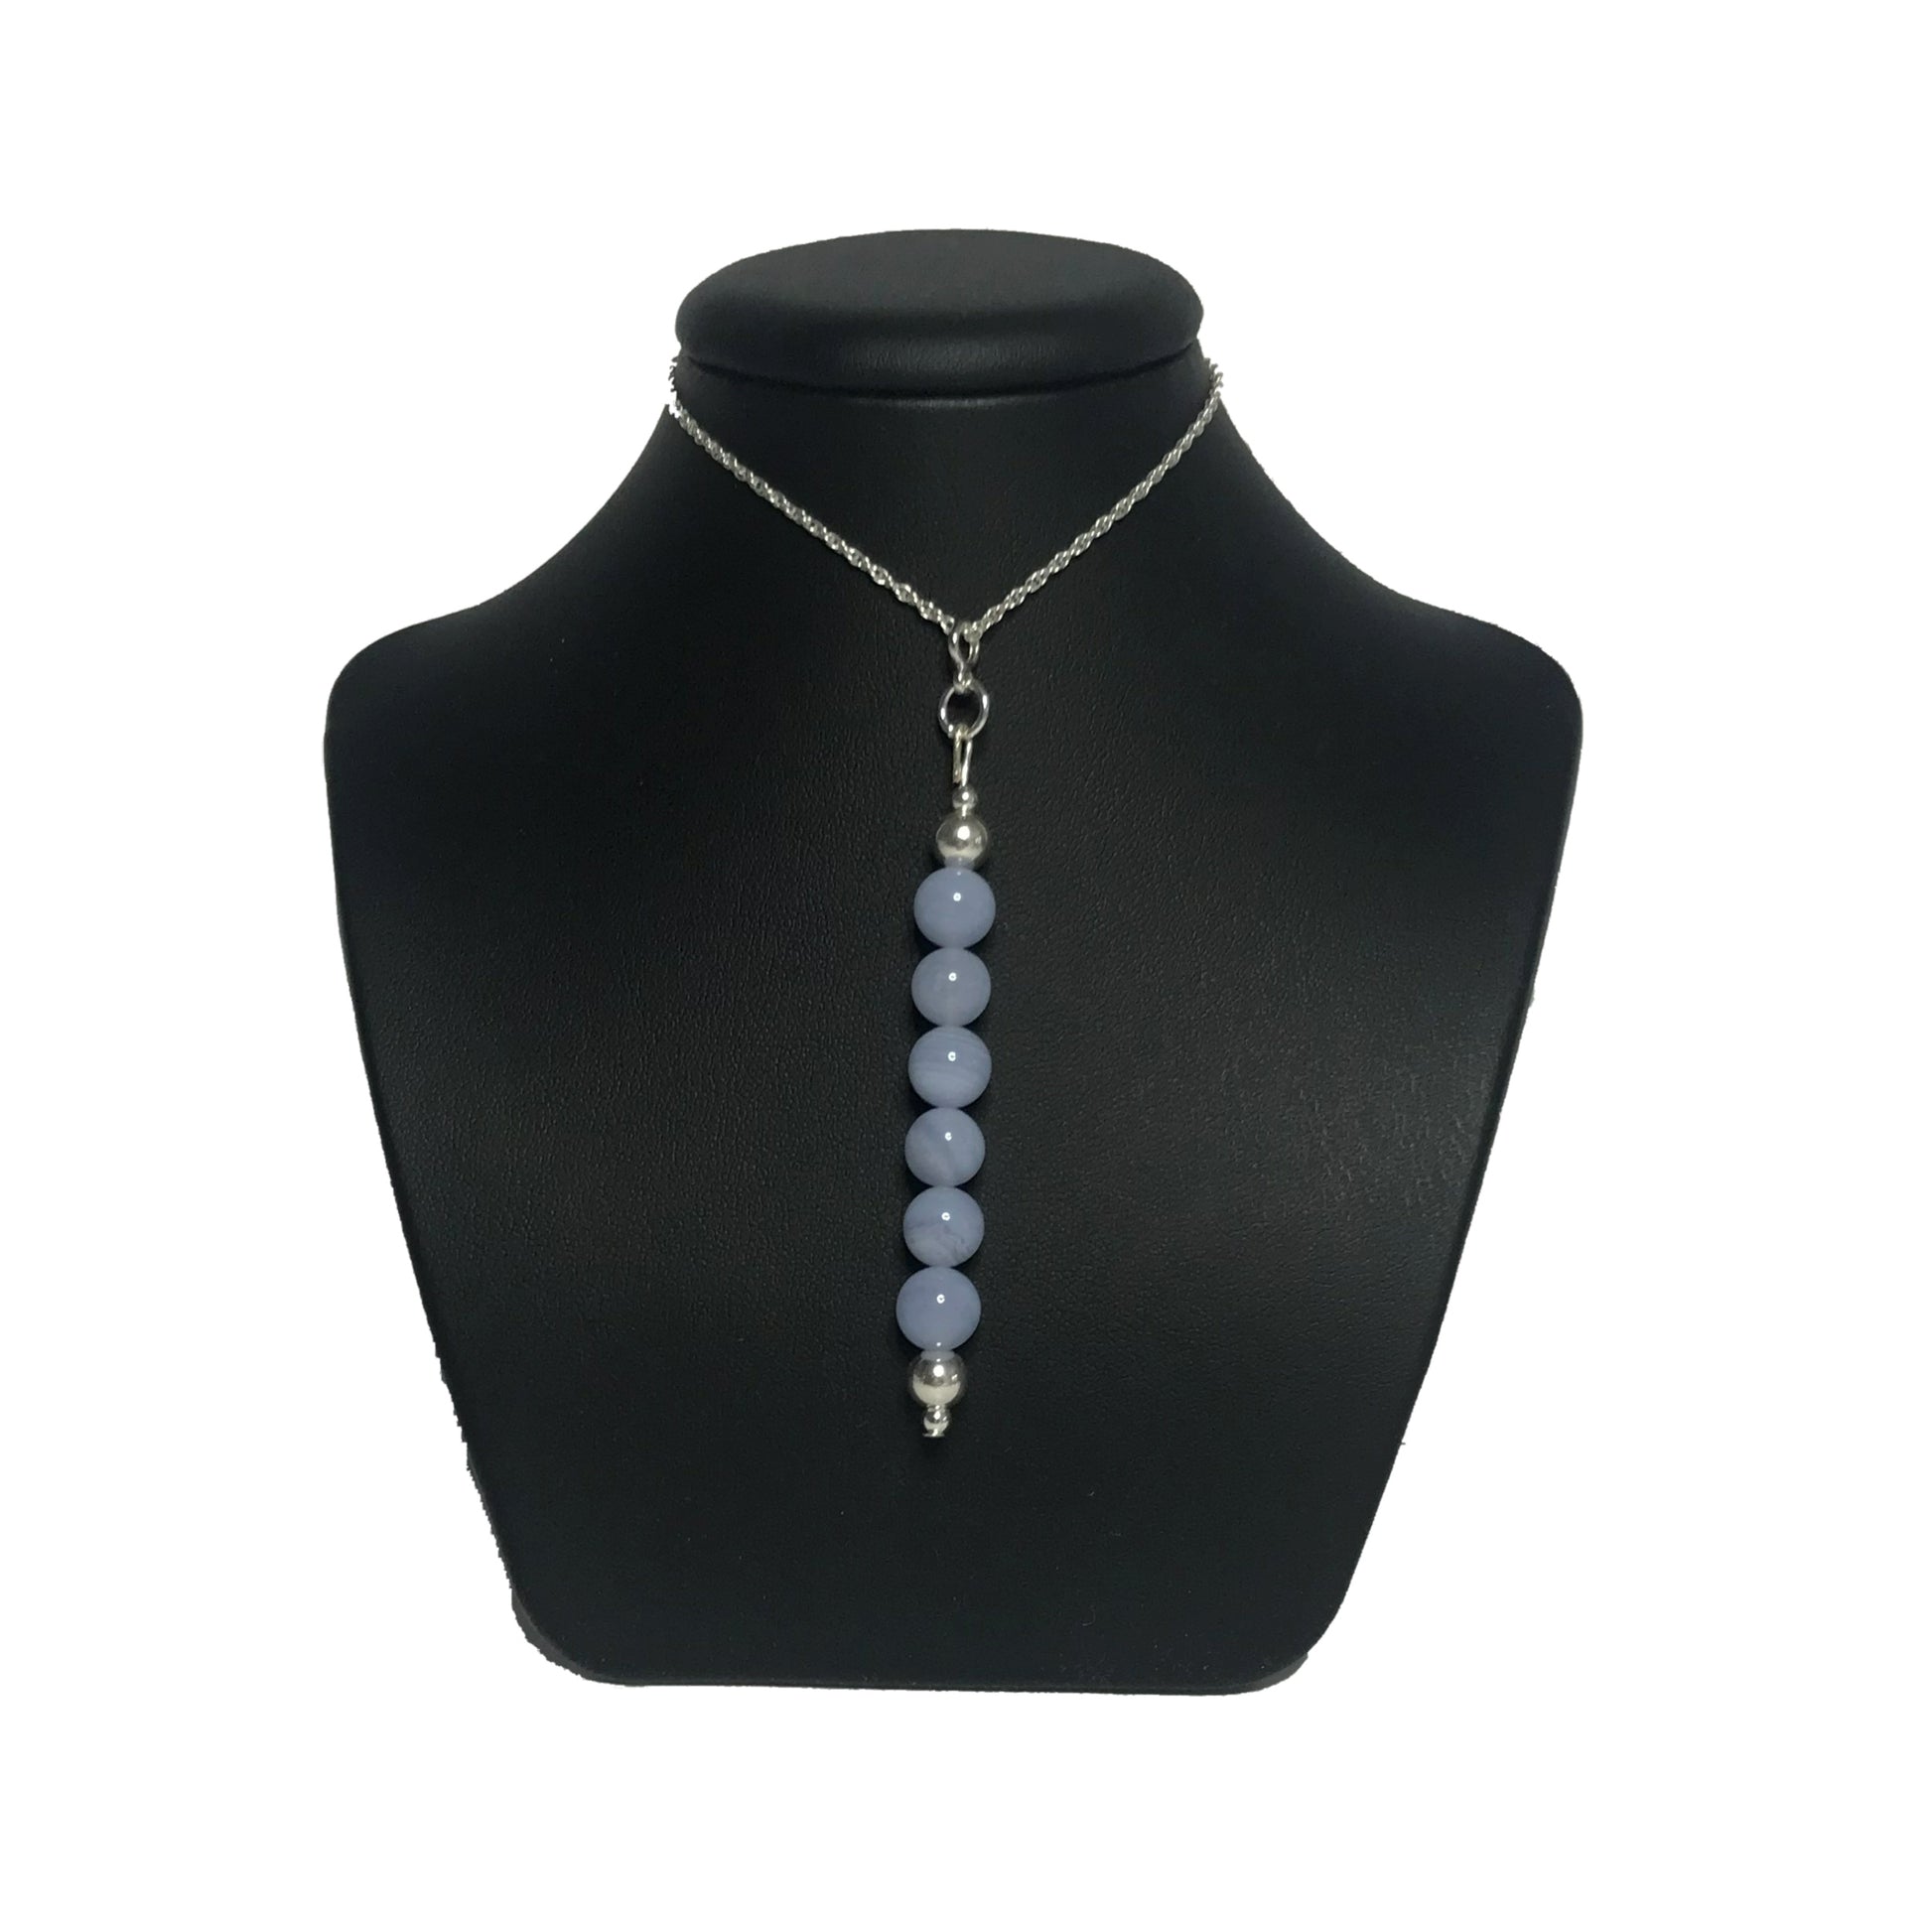 Blue lace agate pendant necklace on stand